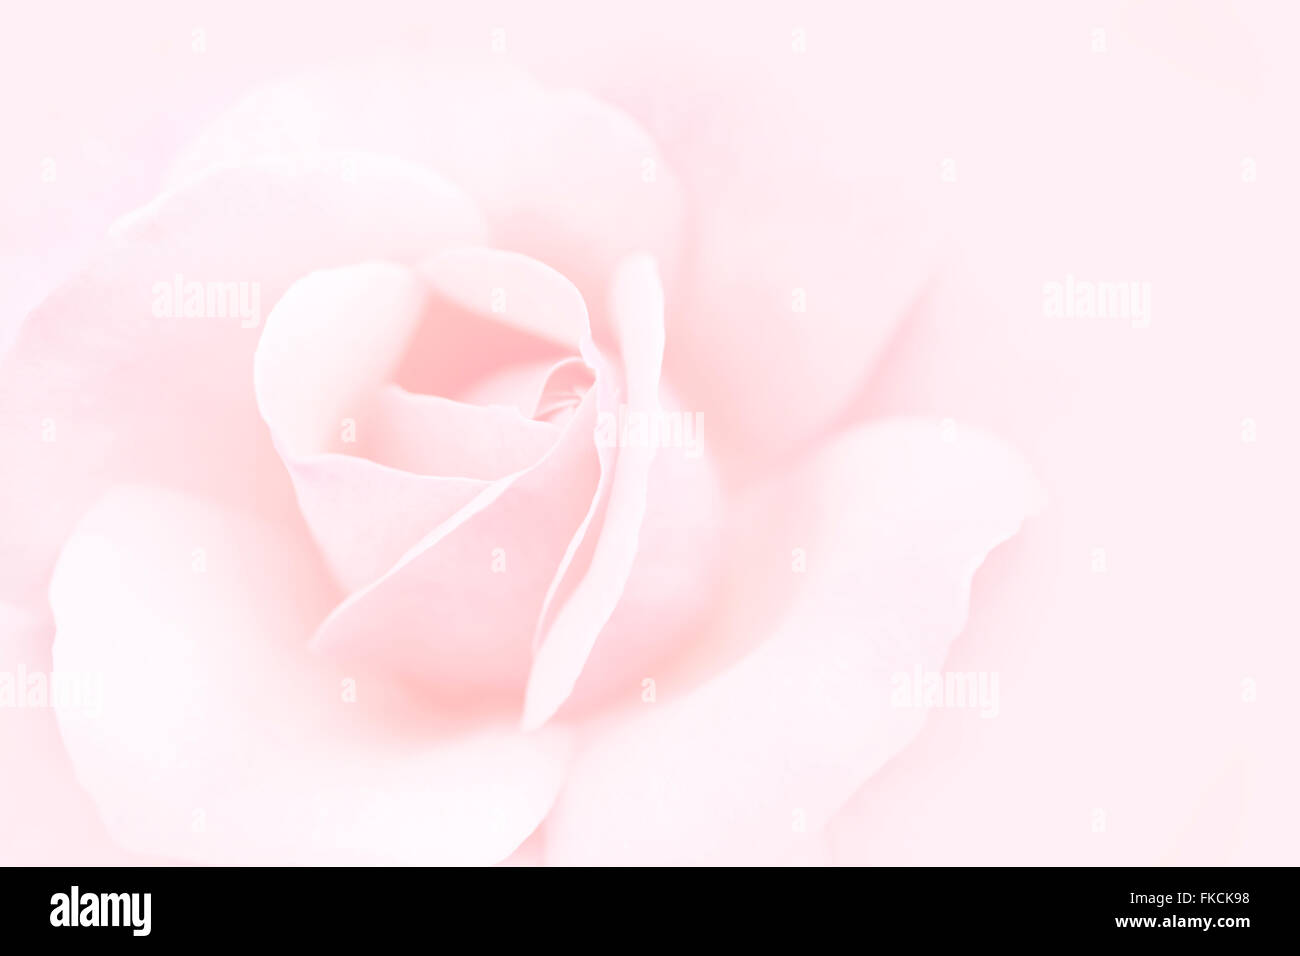 pink rose blurry background Stock Photo